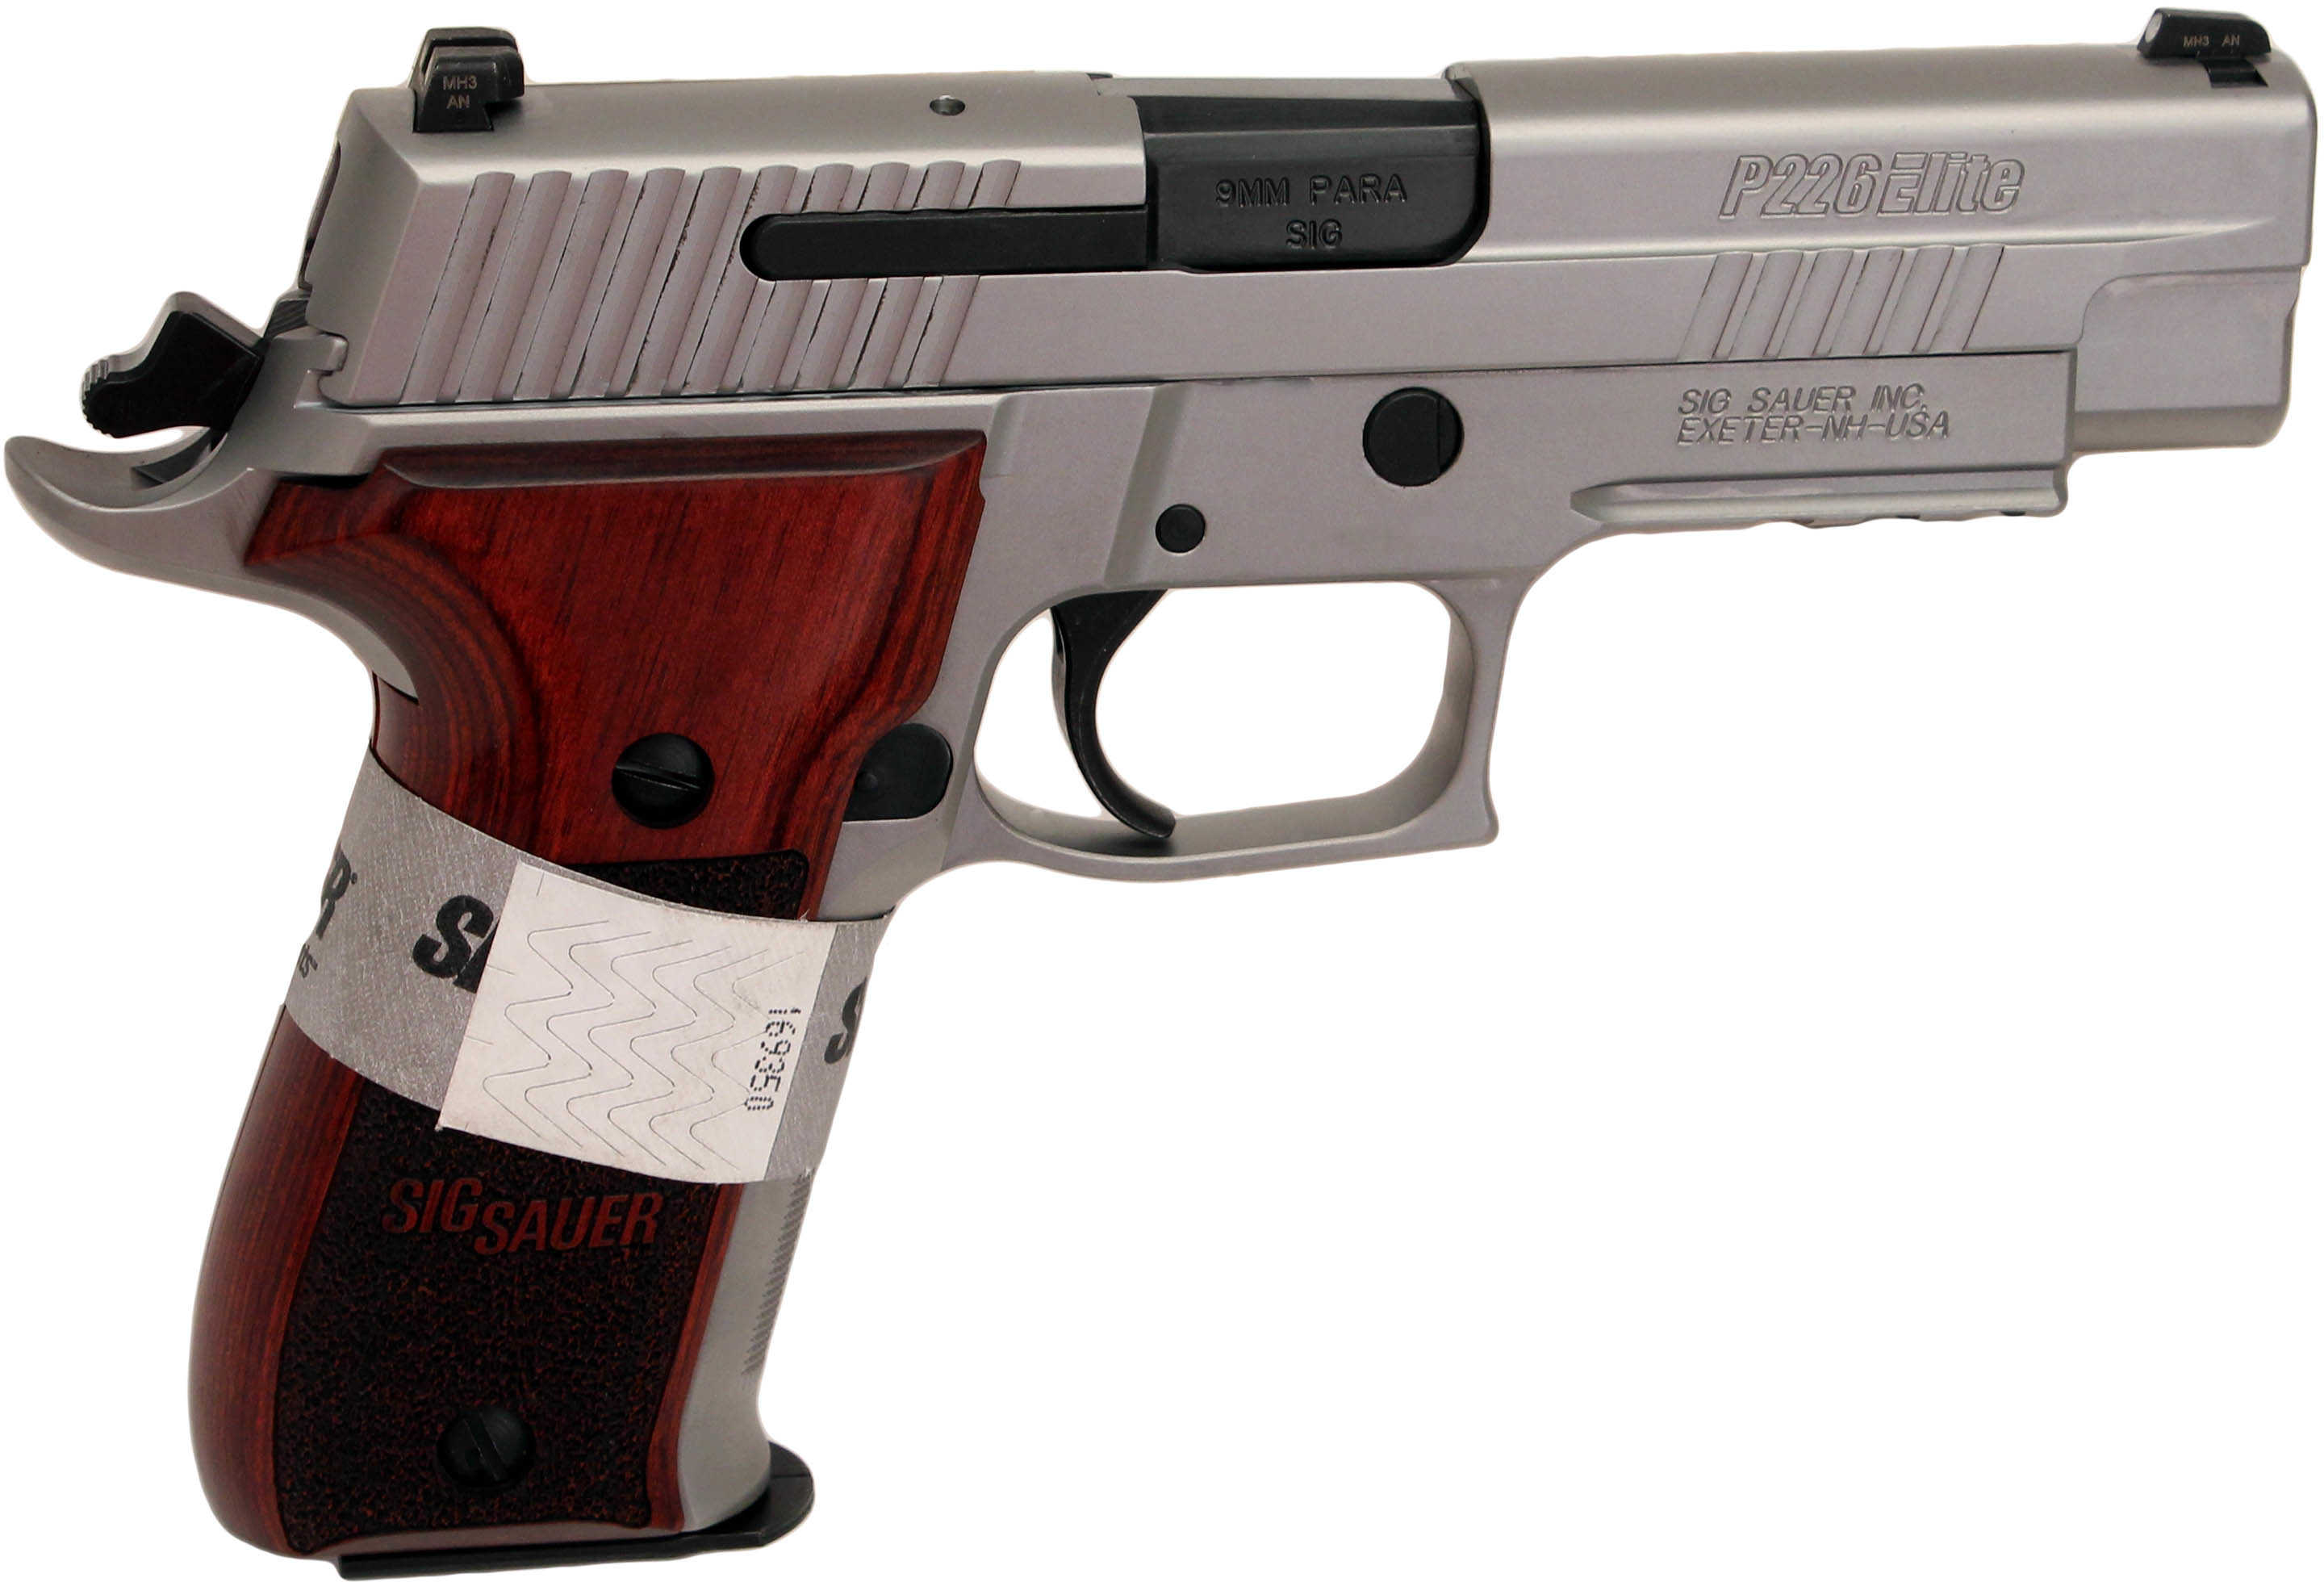 Sig Sauer P226 9mm Luger Elite Stainless Steel Wood Grips 2 15 Round Mag Pistol E26r9sse 1001589 4142